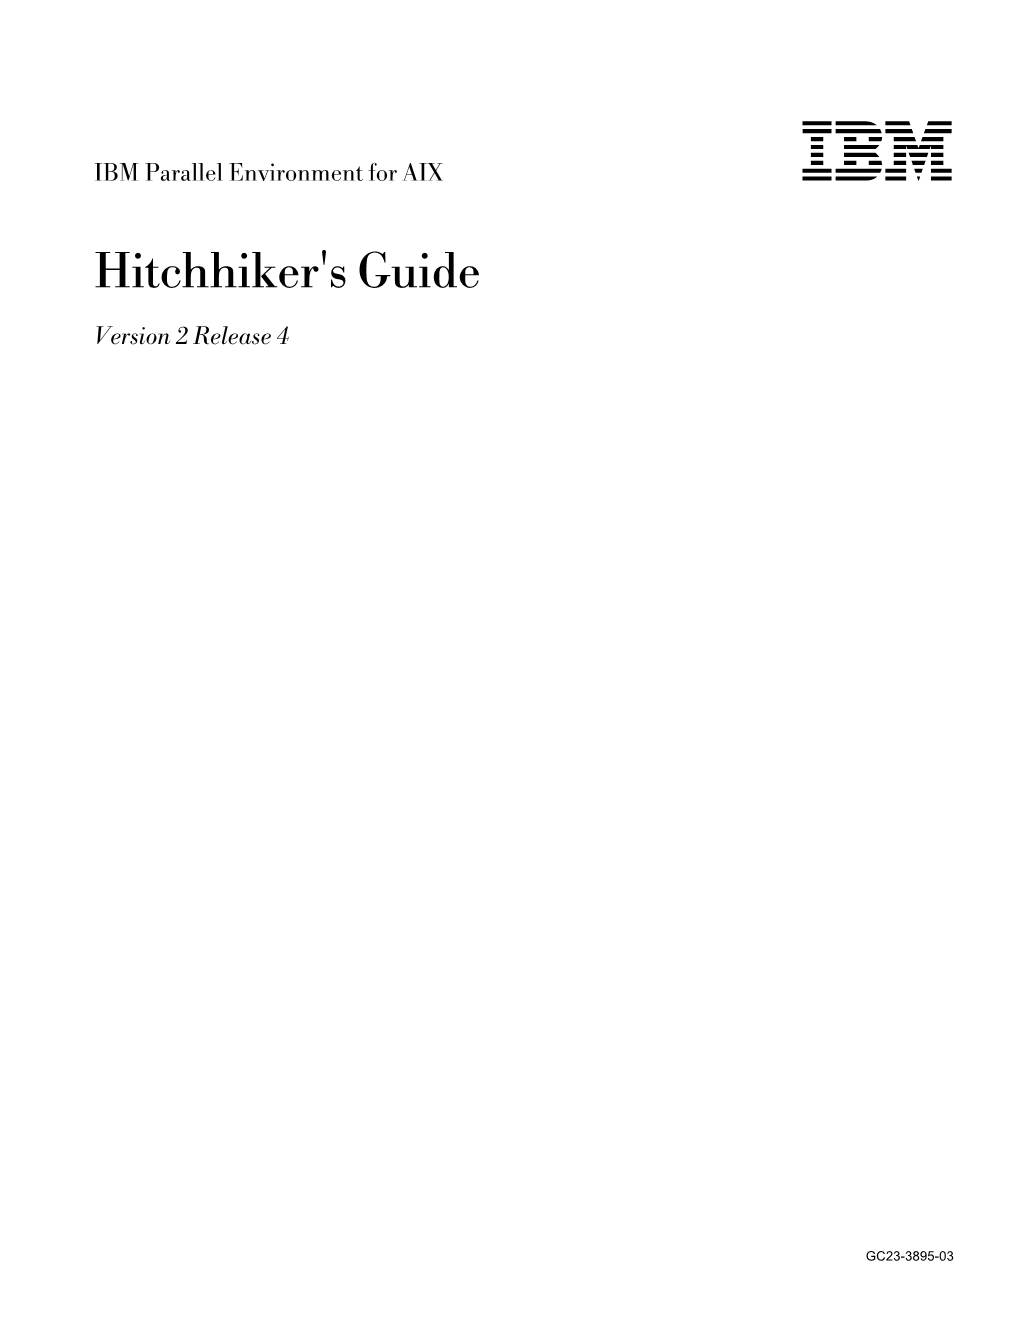 IBM Parallel Environment for AIX Hitchhiker's Guide Version 2 Release 4 Publication No